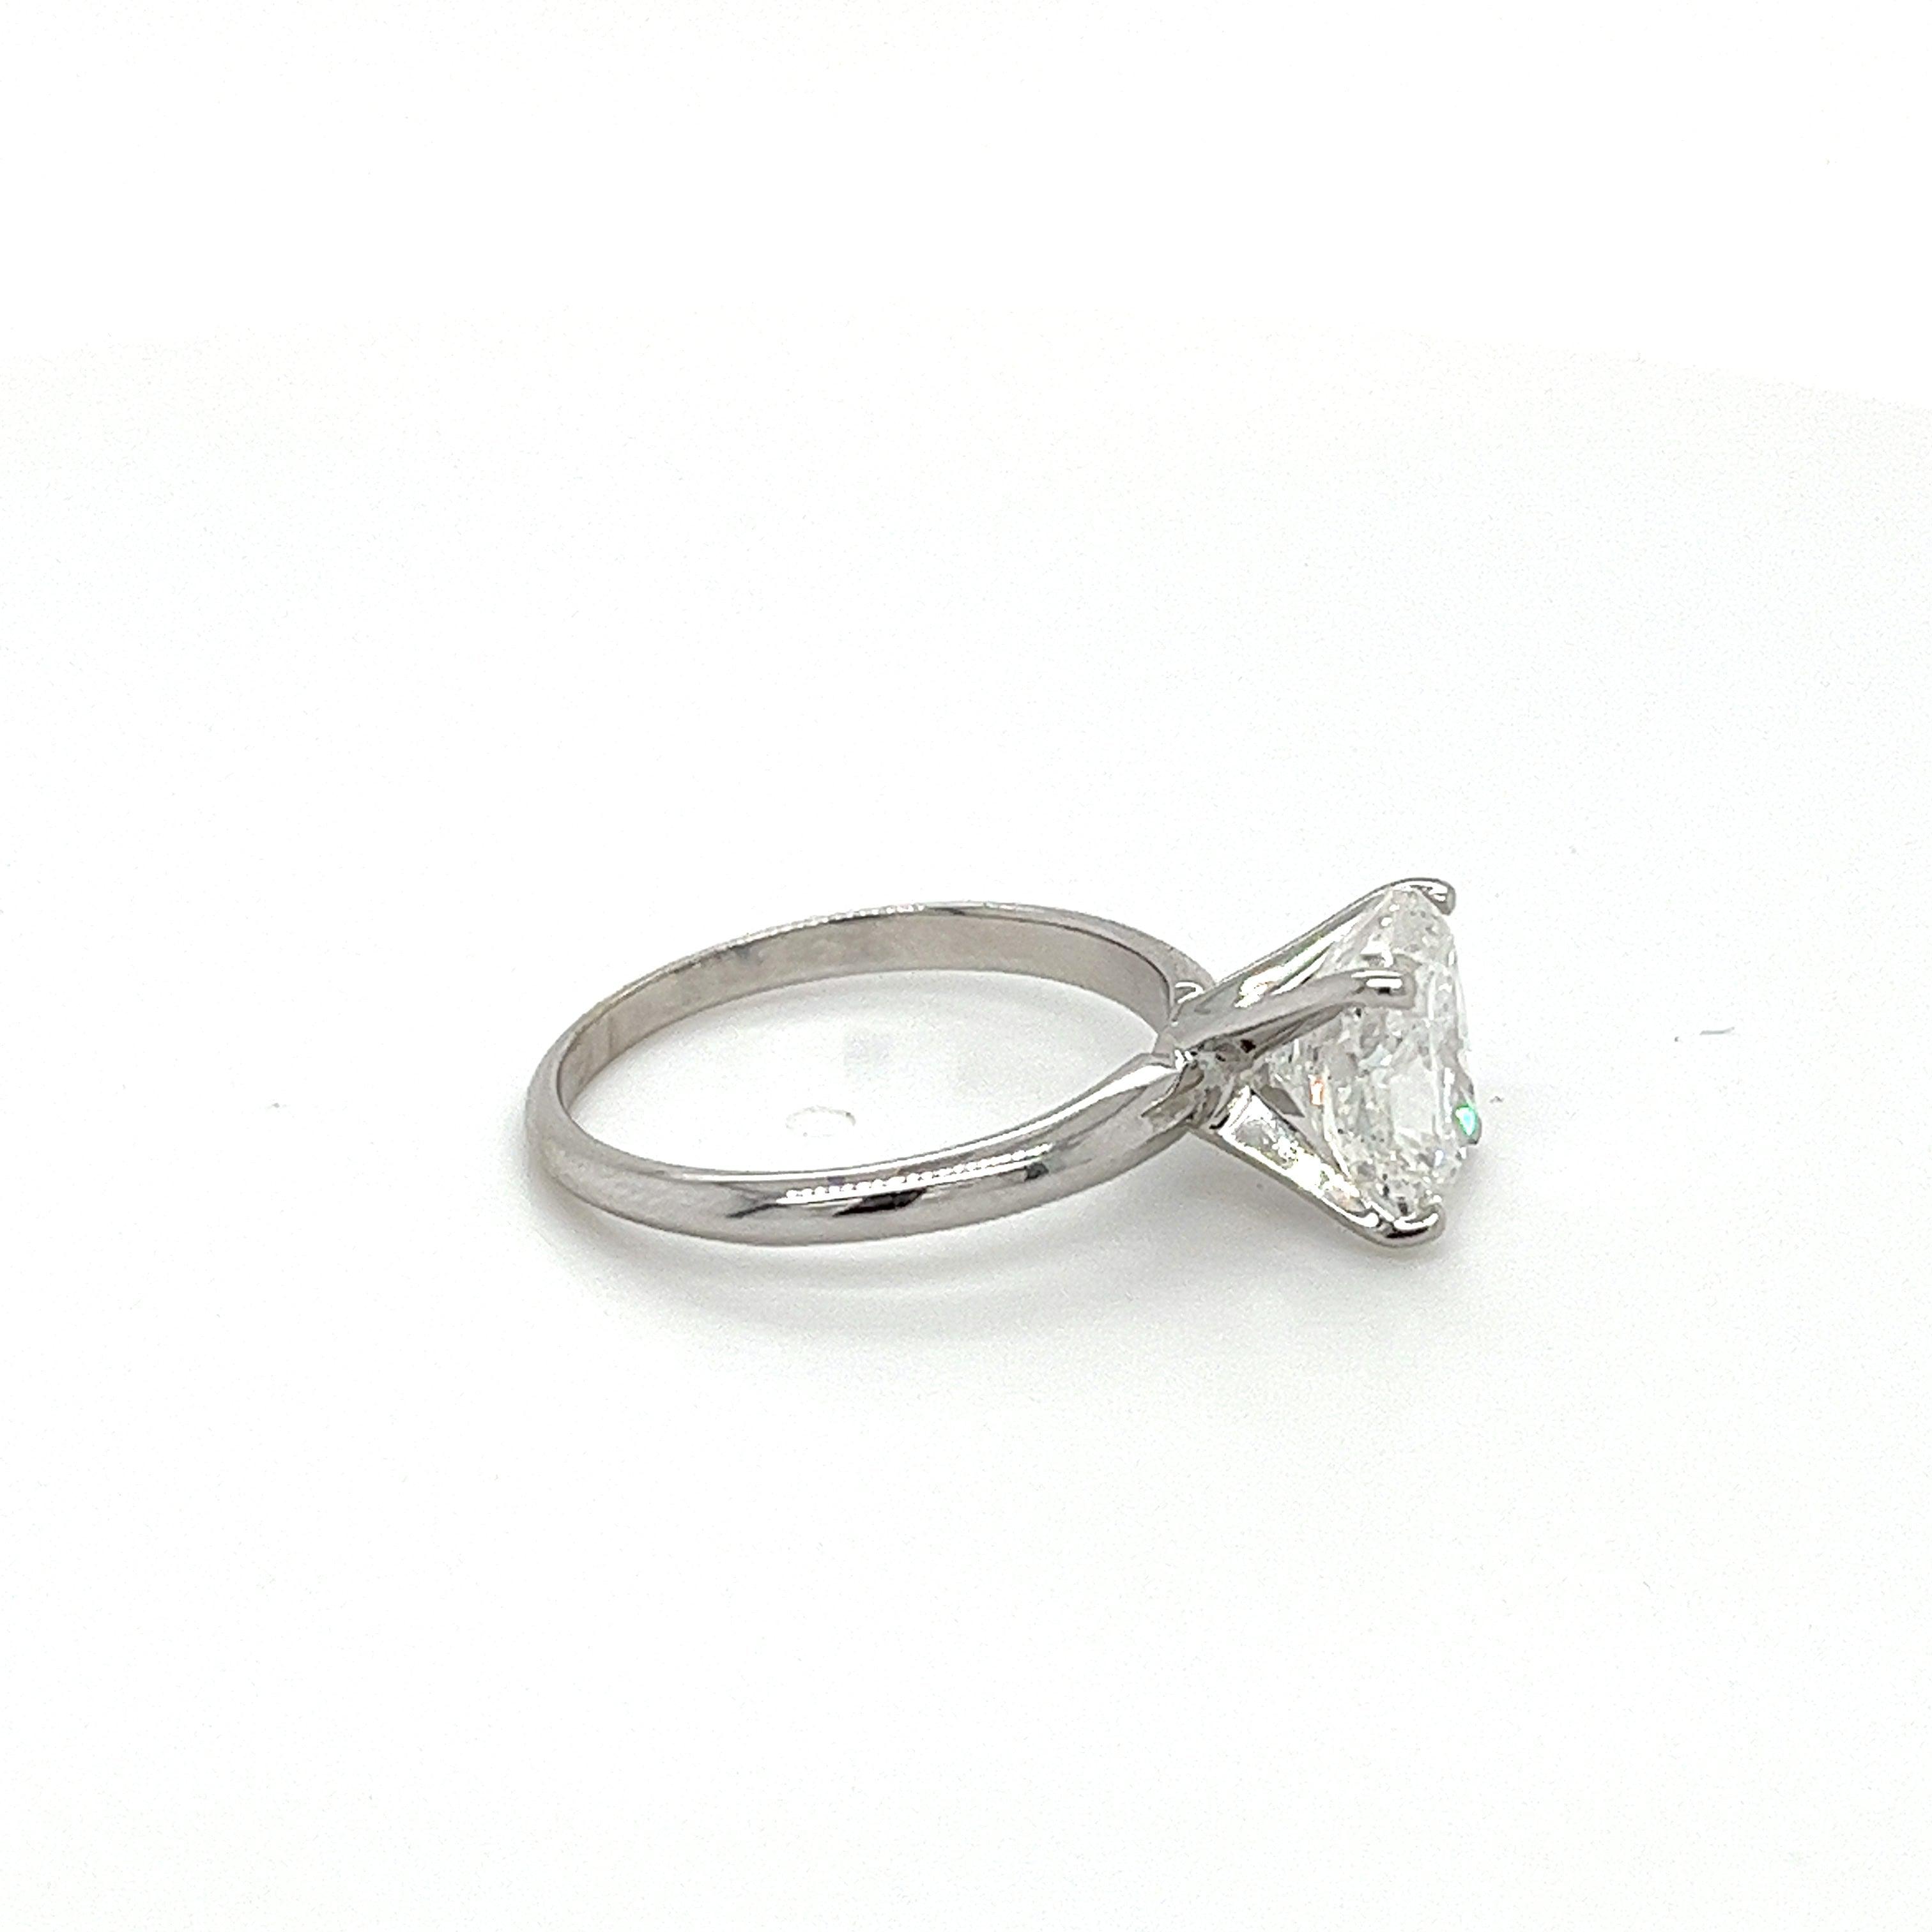 2.79 Carat Lab Grown Diamond Engagement Ring in 14K White Gold Solitaire 4-Prong Setting-Engagement Ring-ASSAY